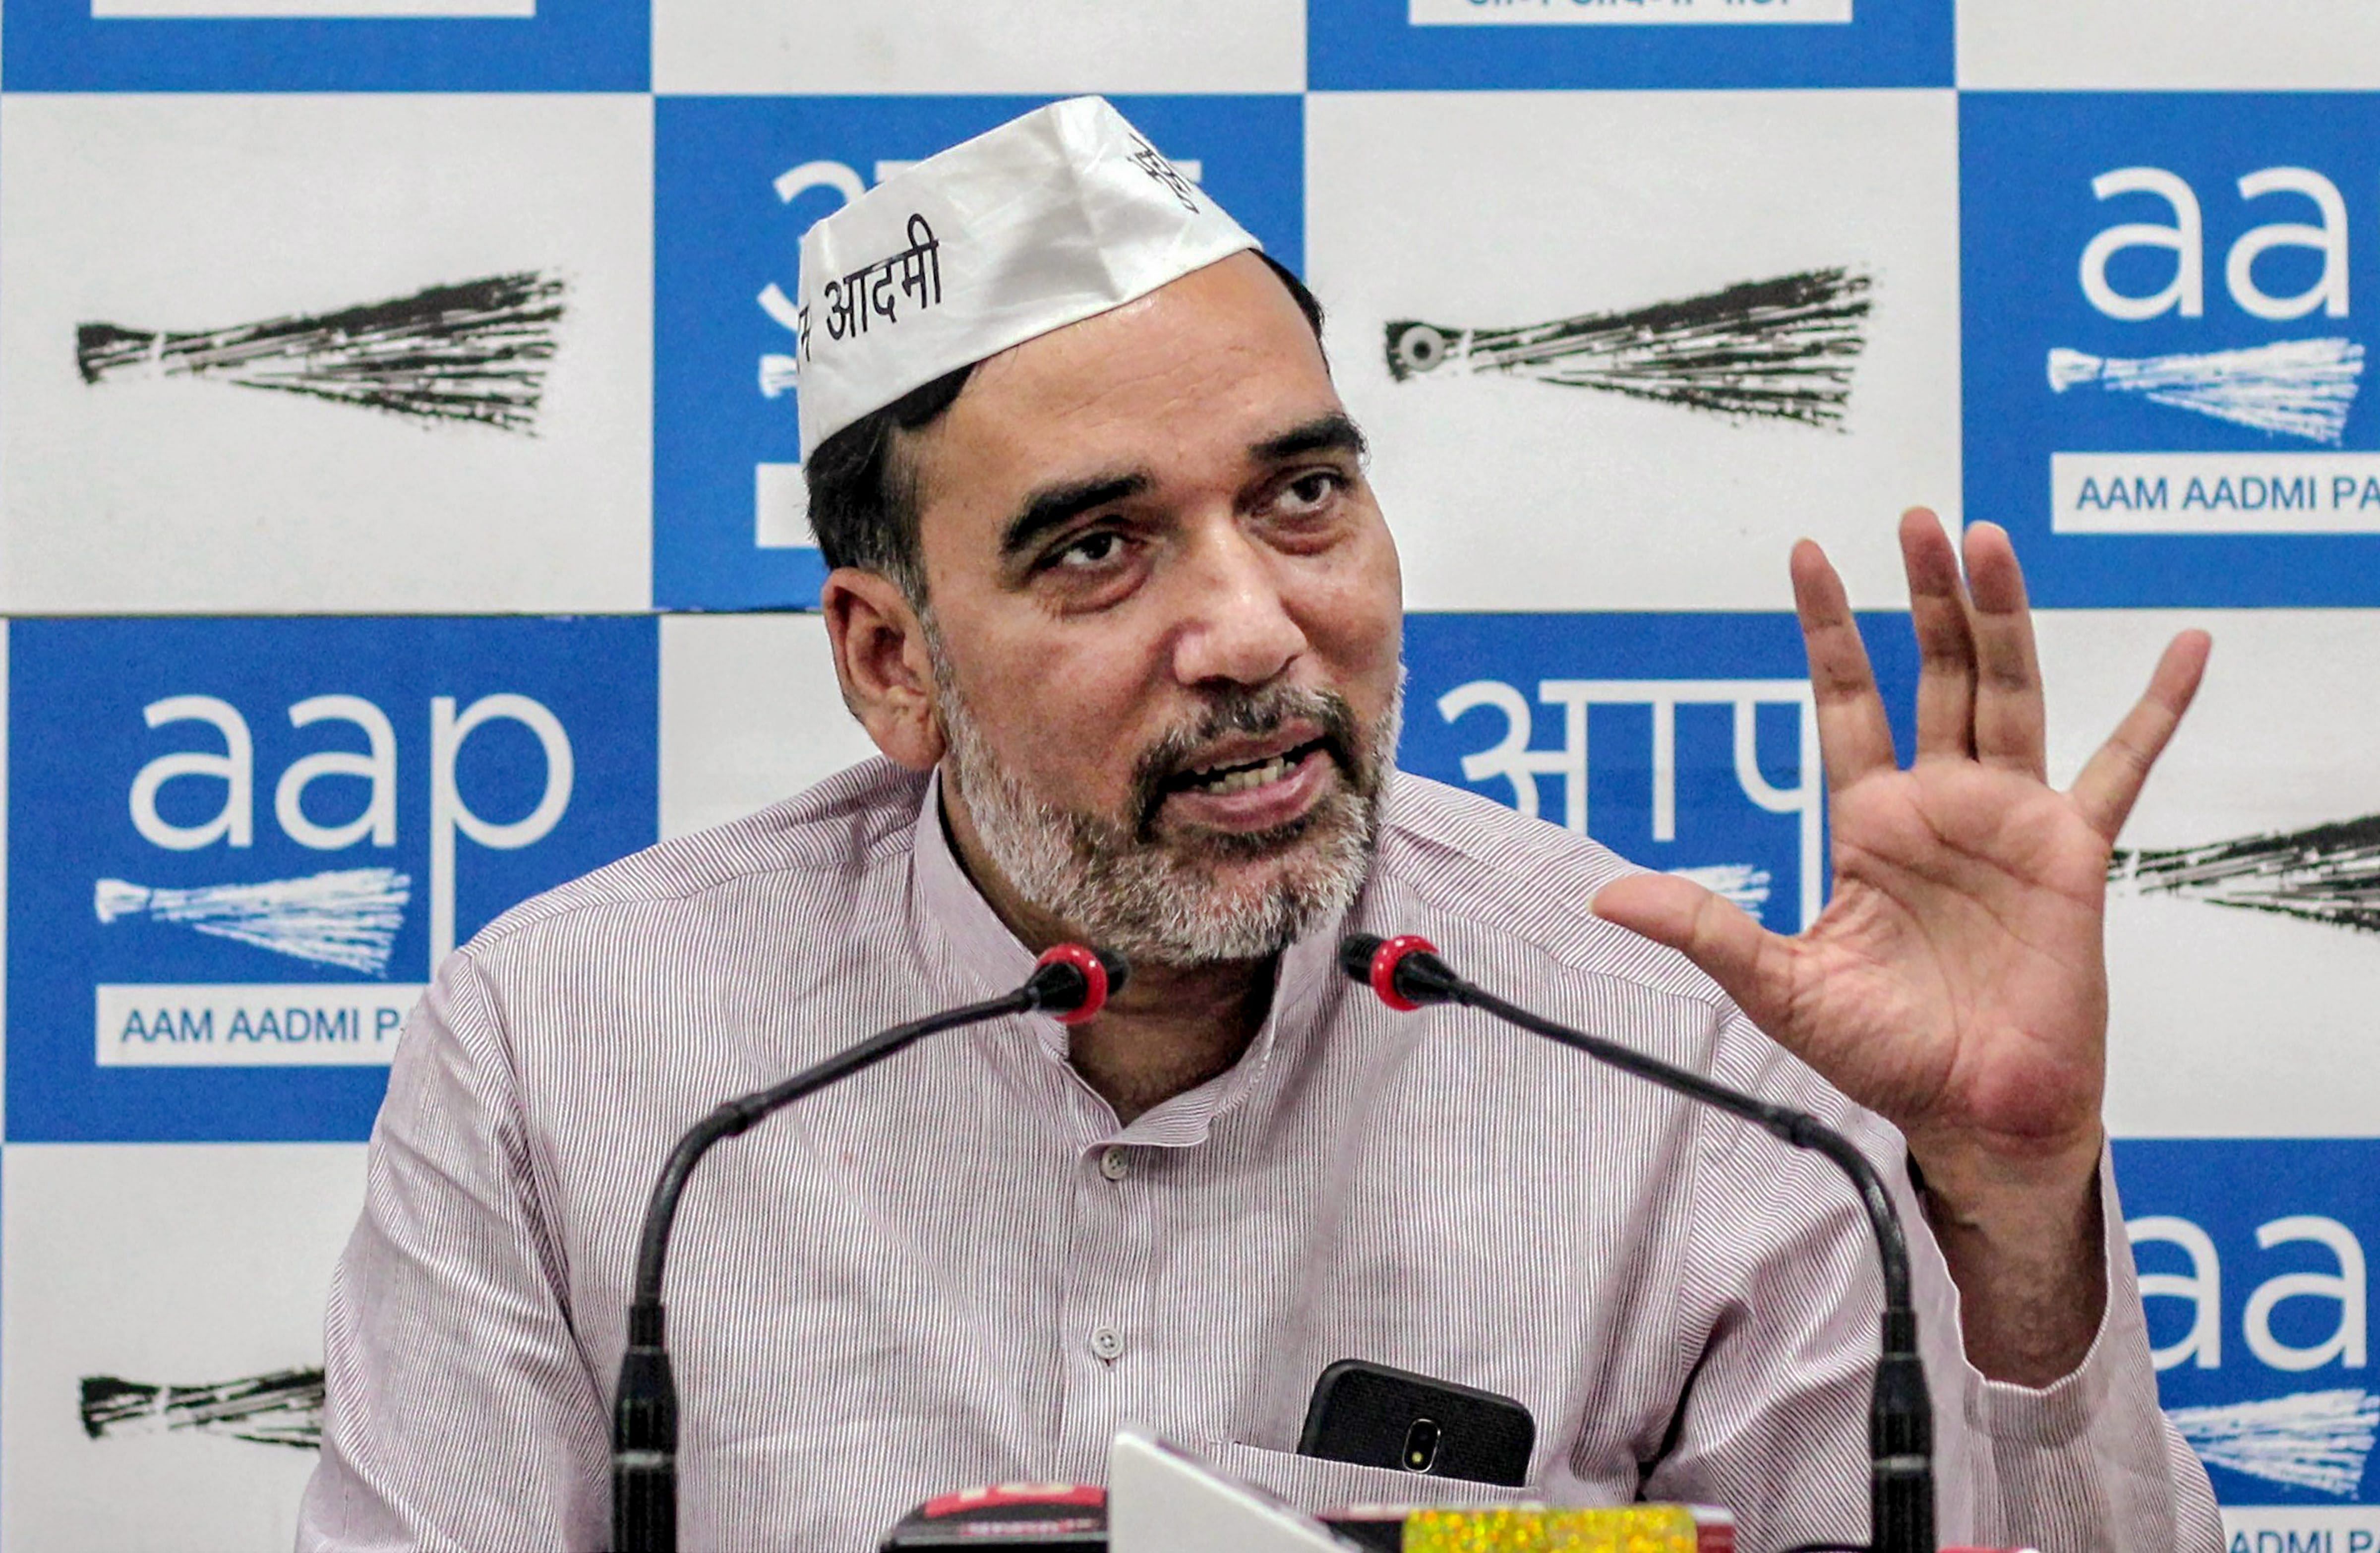 AAP's Delhi convenor Gopal Rai addresses a press conference to announce about the party's campaign for Lok Sabha elections at the party office. (PTI Photo)